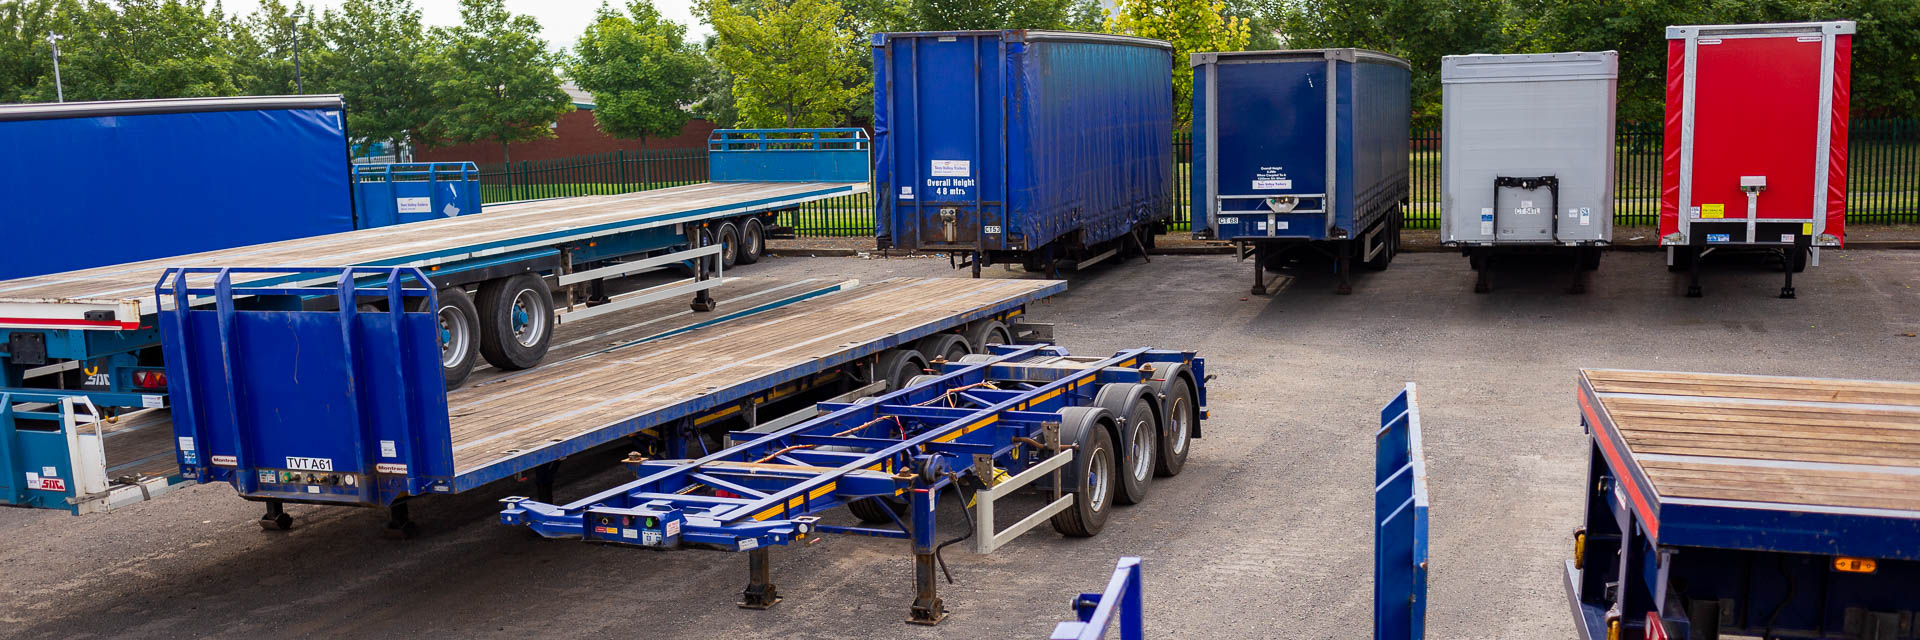 Photo of various types of fully serviced commercial trailers for hire by Tees Valley Trailers. Skeletal, Curtain Sider and Flat trailers are all shown.